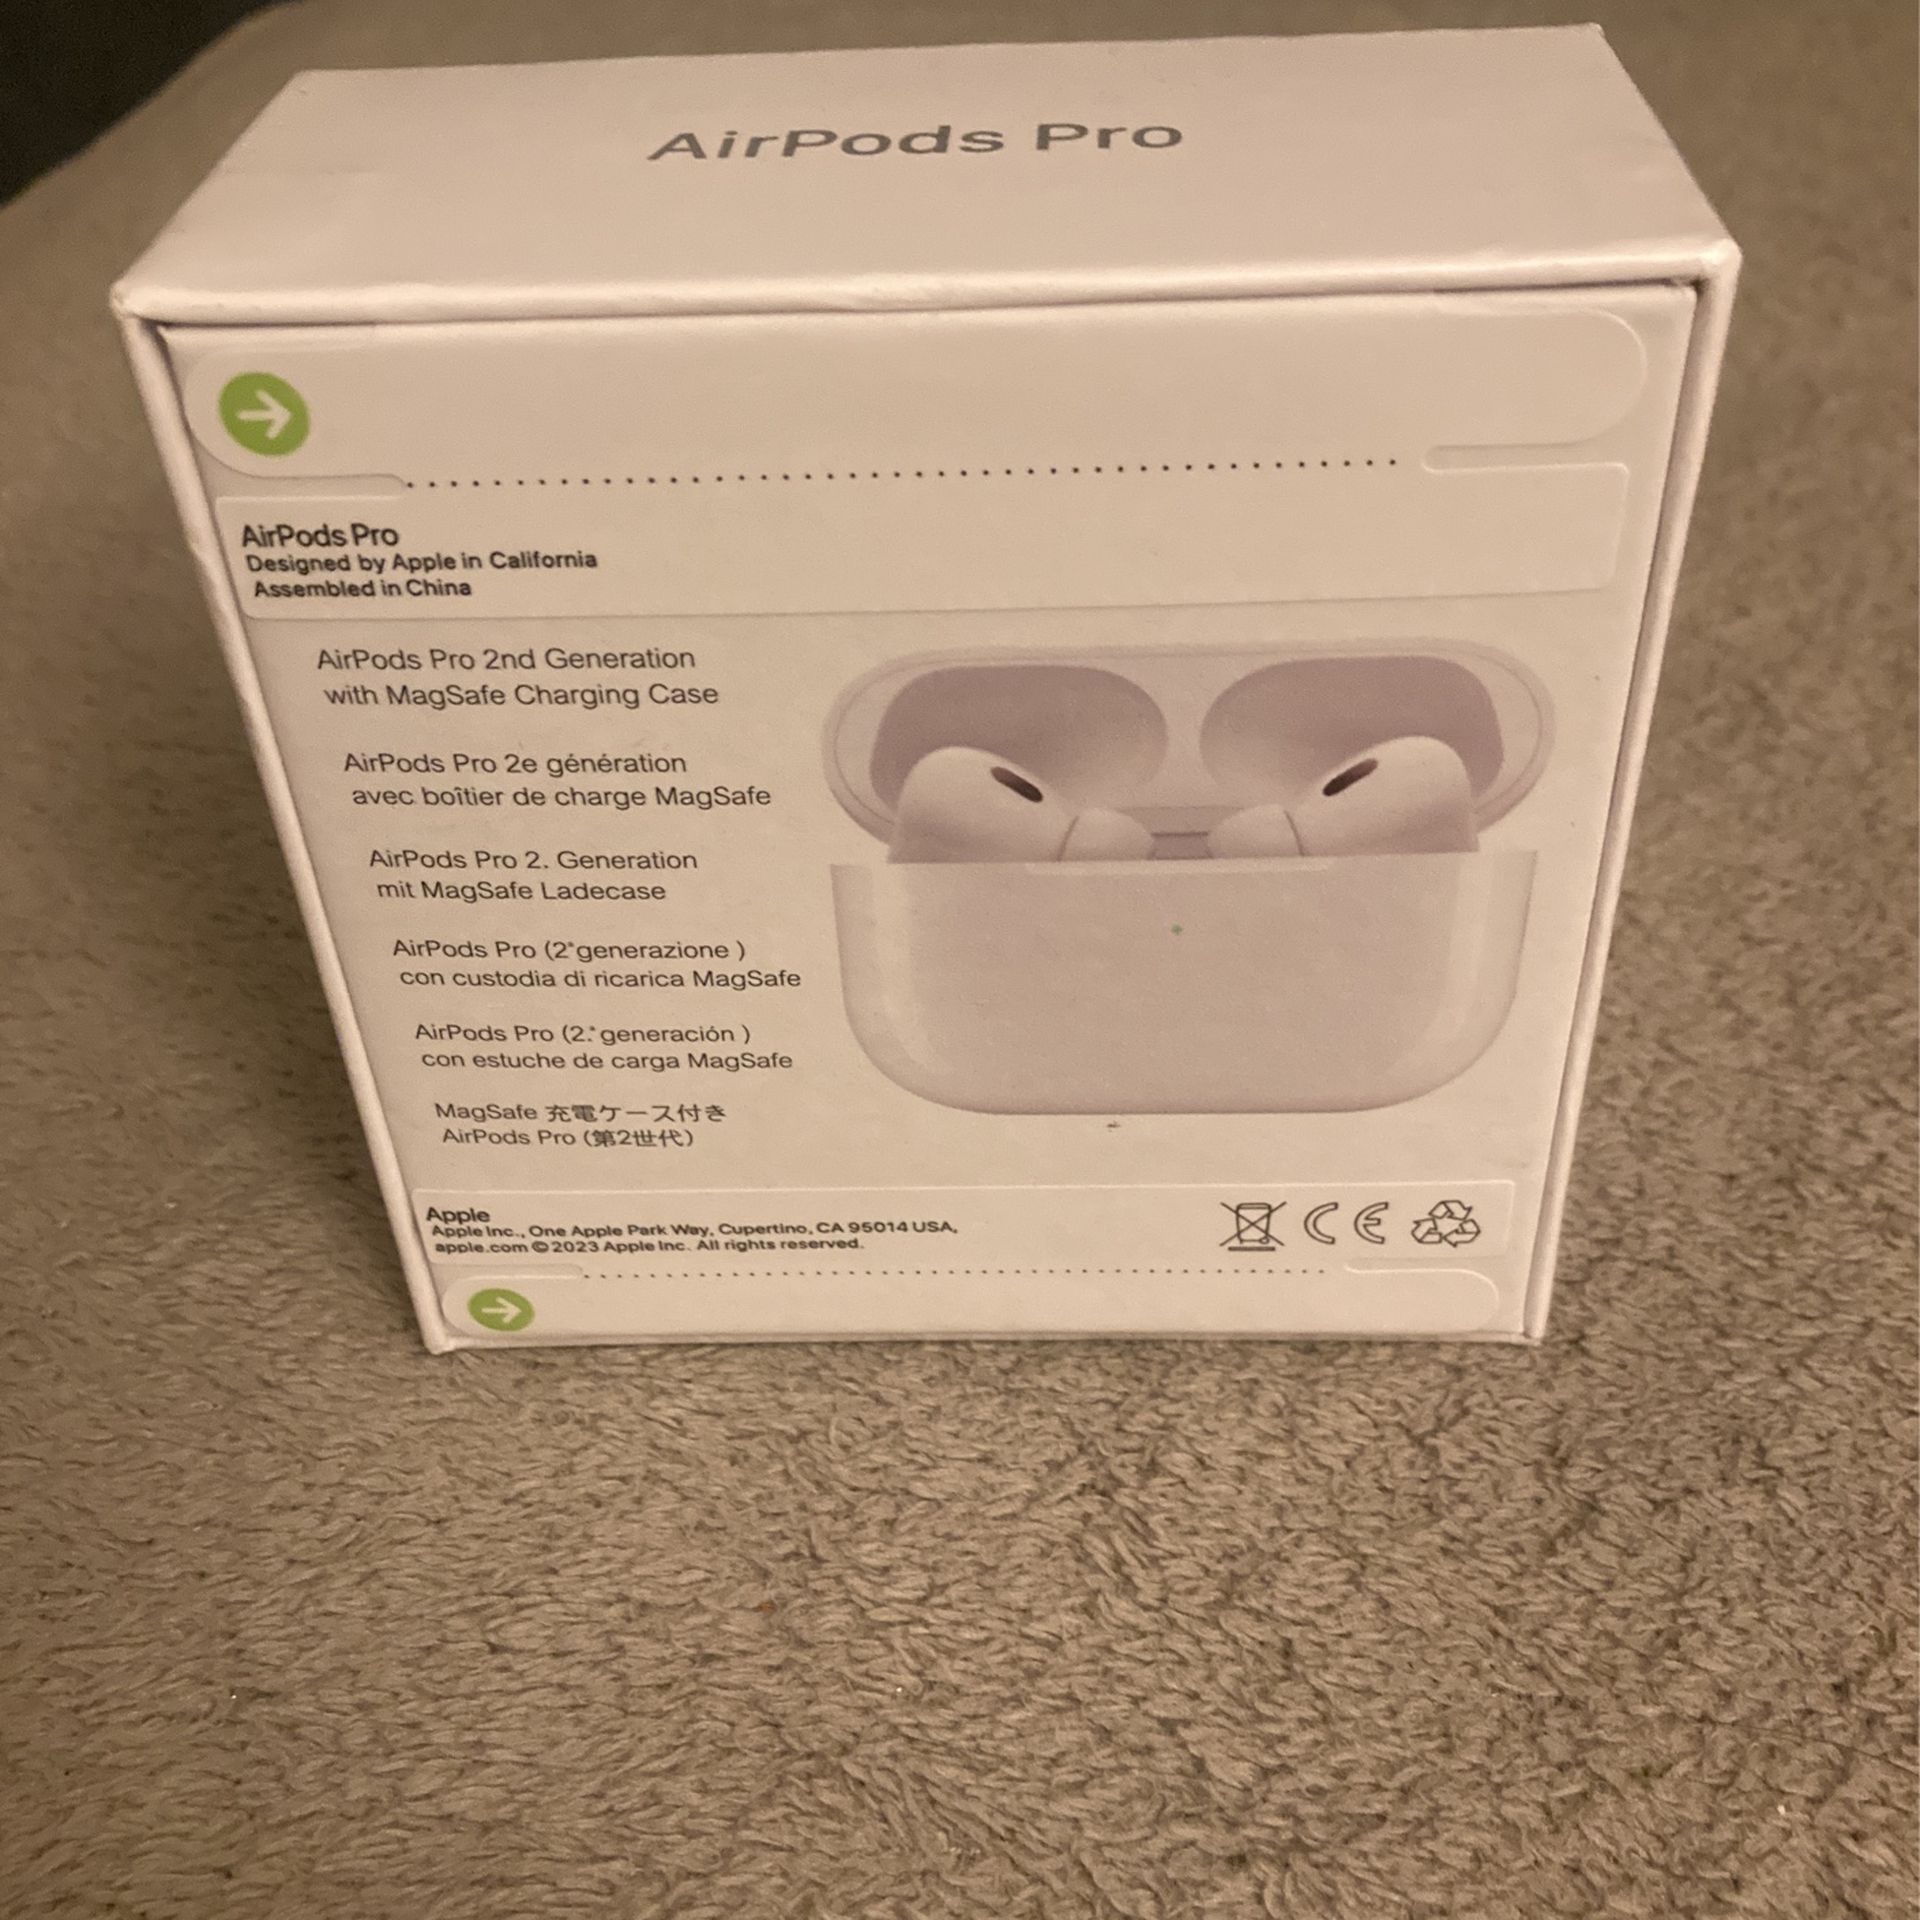 AirPods Pro 2nd Generation $40